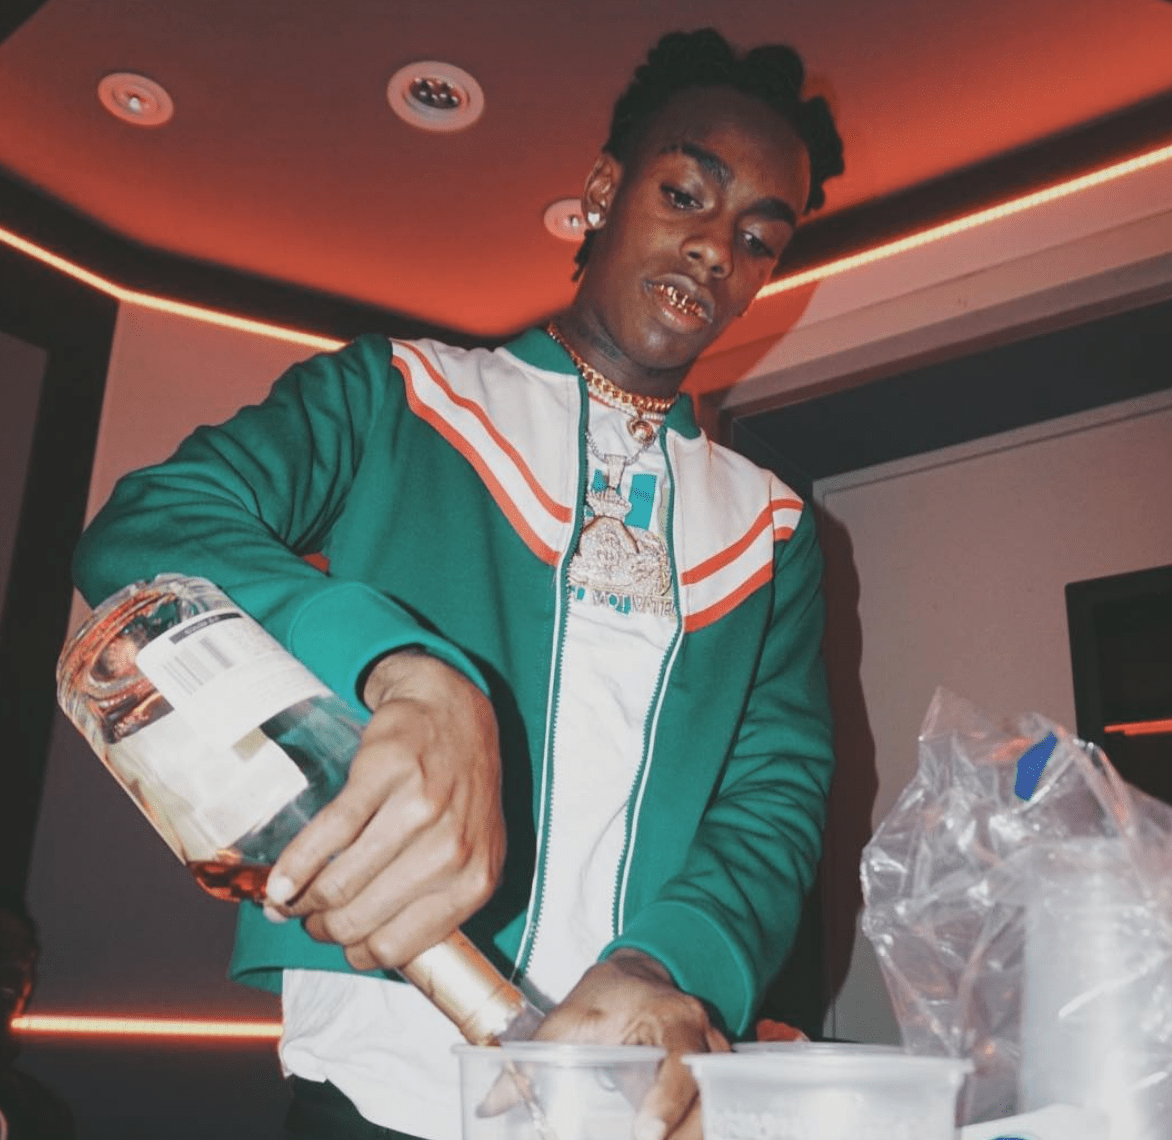 Ynw Melly Wallpaper Iphone